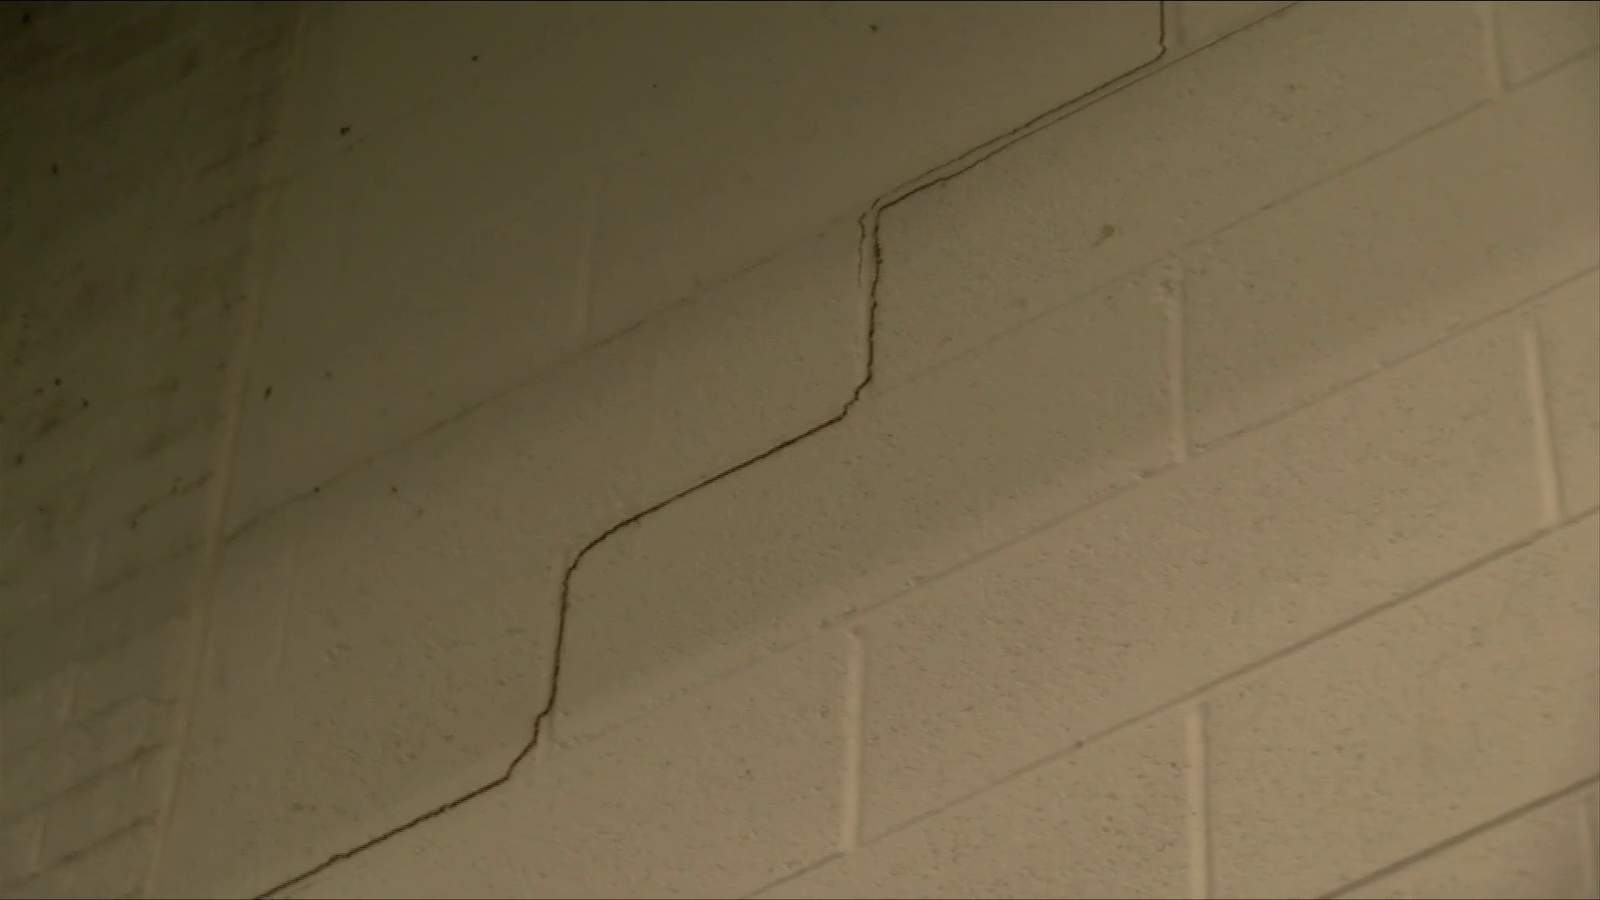 Southwest Virginia school cleared to open after being damaged by weekend earthquake